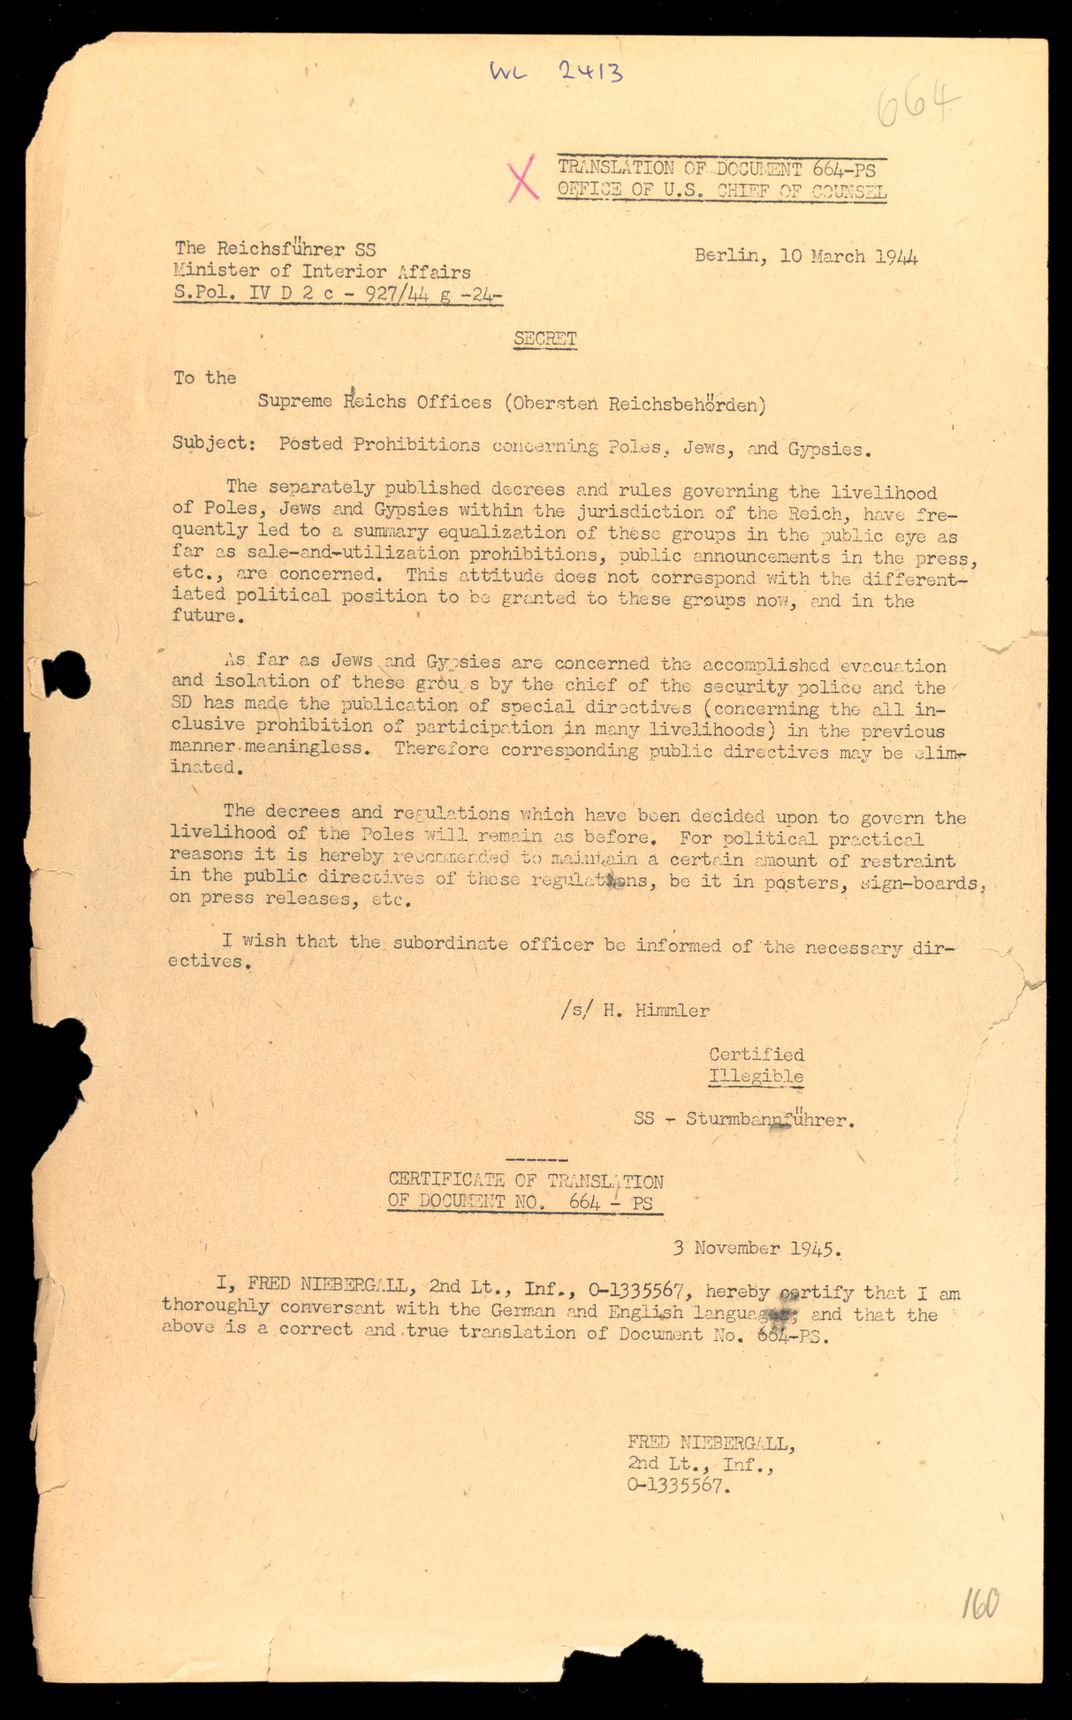 immler, "Posted Prohibitions Concerning Poles, Jews, and Gypsies" 10 March 1944, translation from the Nuremburg War Crimes trials Wiener Holocaust Library Collections